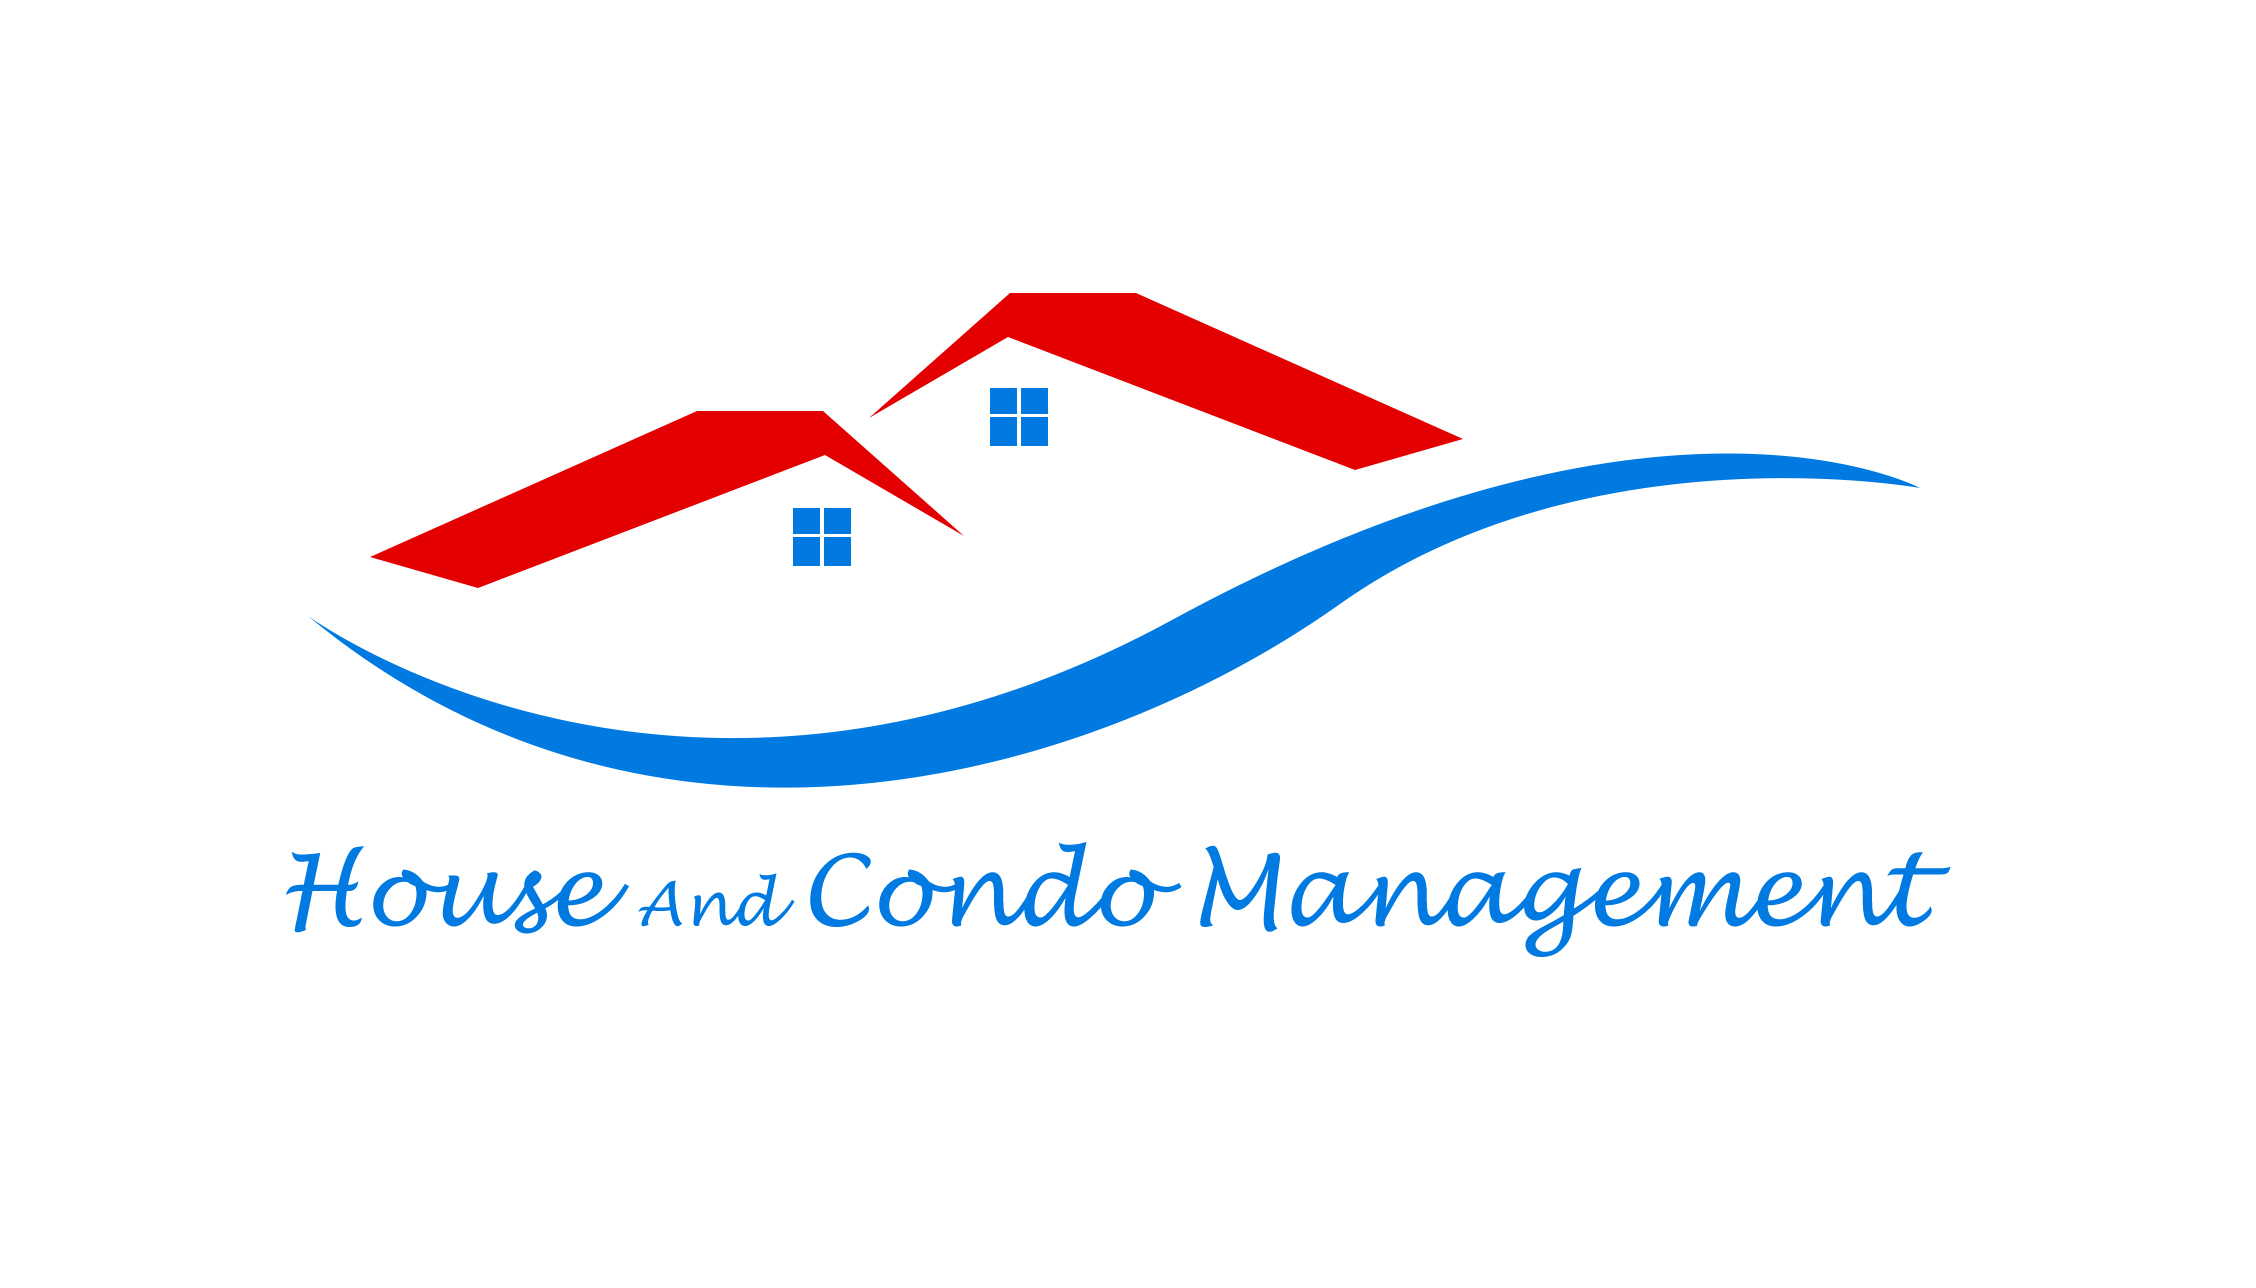 House and Condo Management